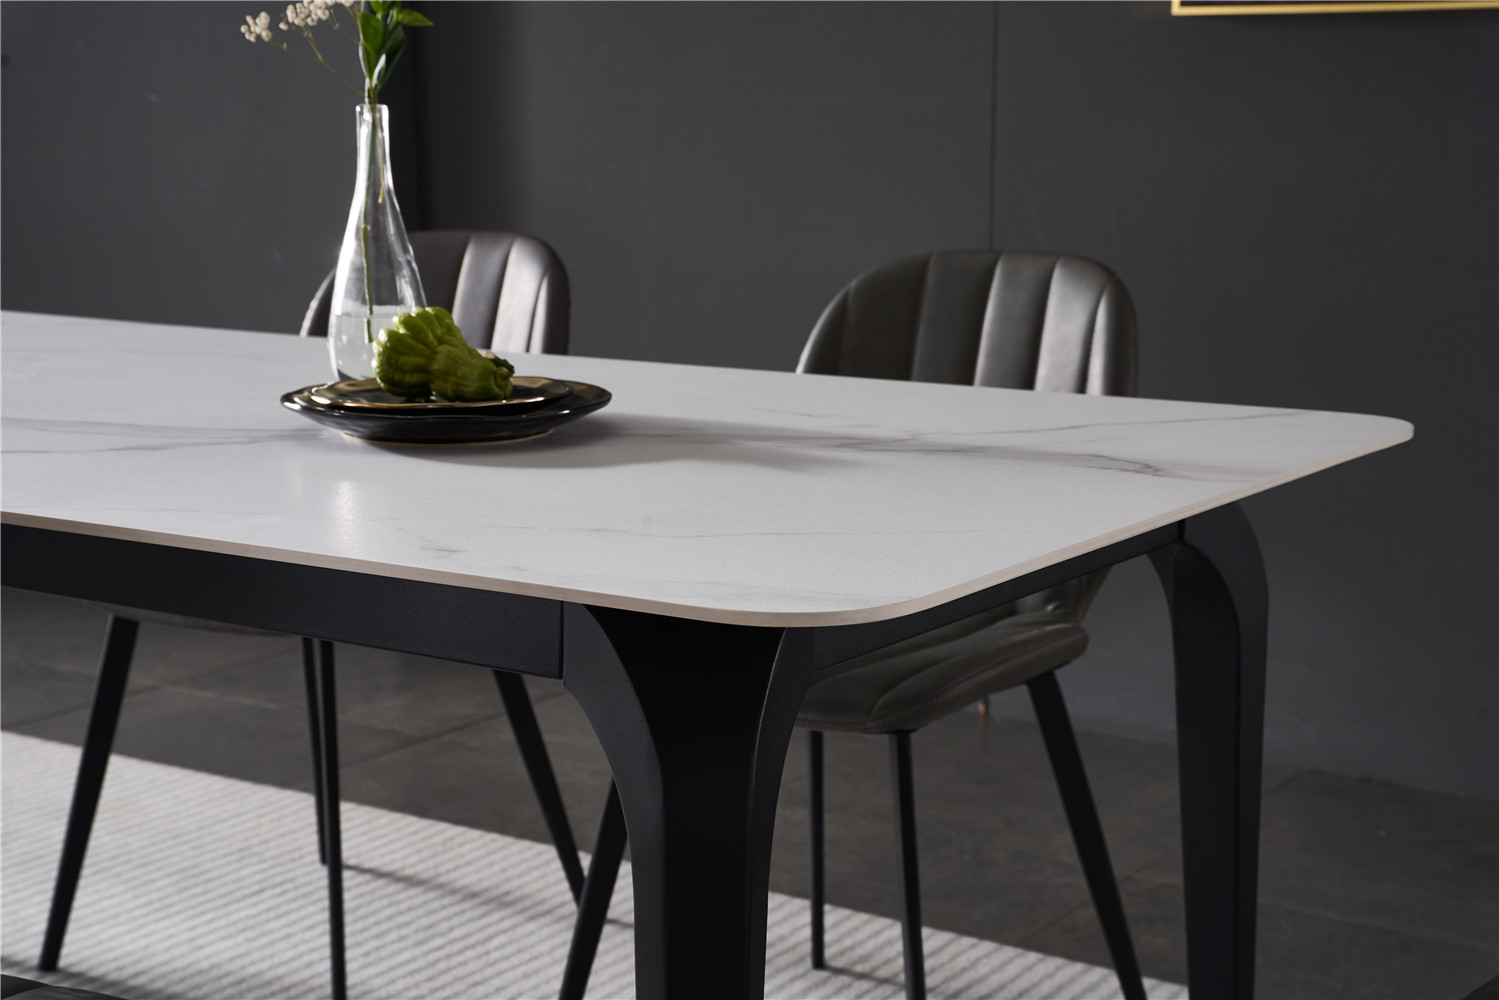 dkf768-china modern luxury home furniture metal slate mable top kitchen dining table supplier manufacturer factory company-furbyme (6)